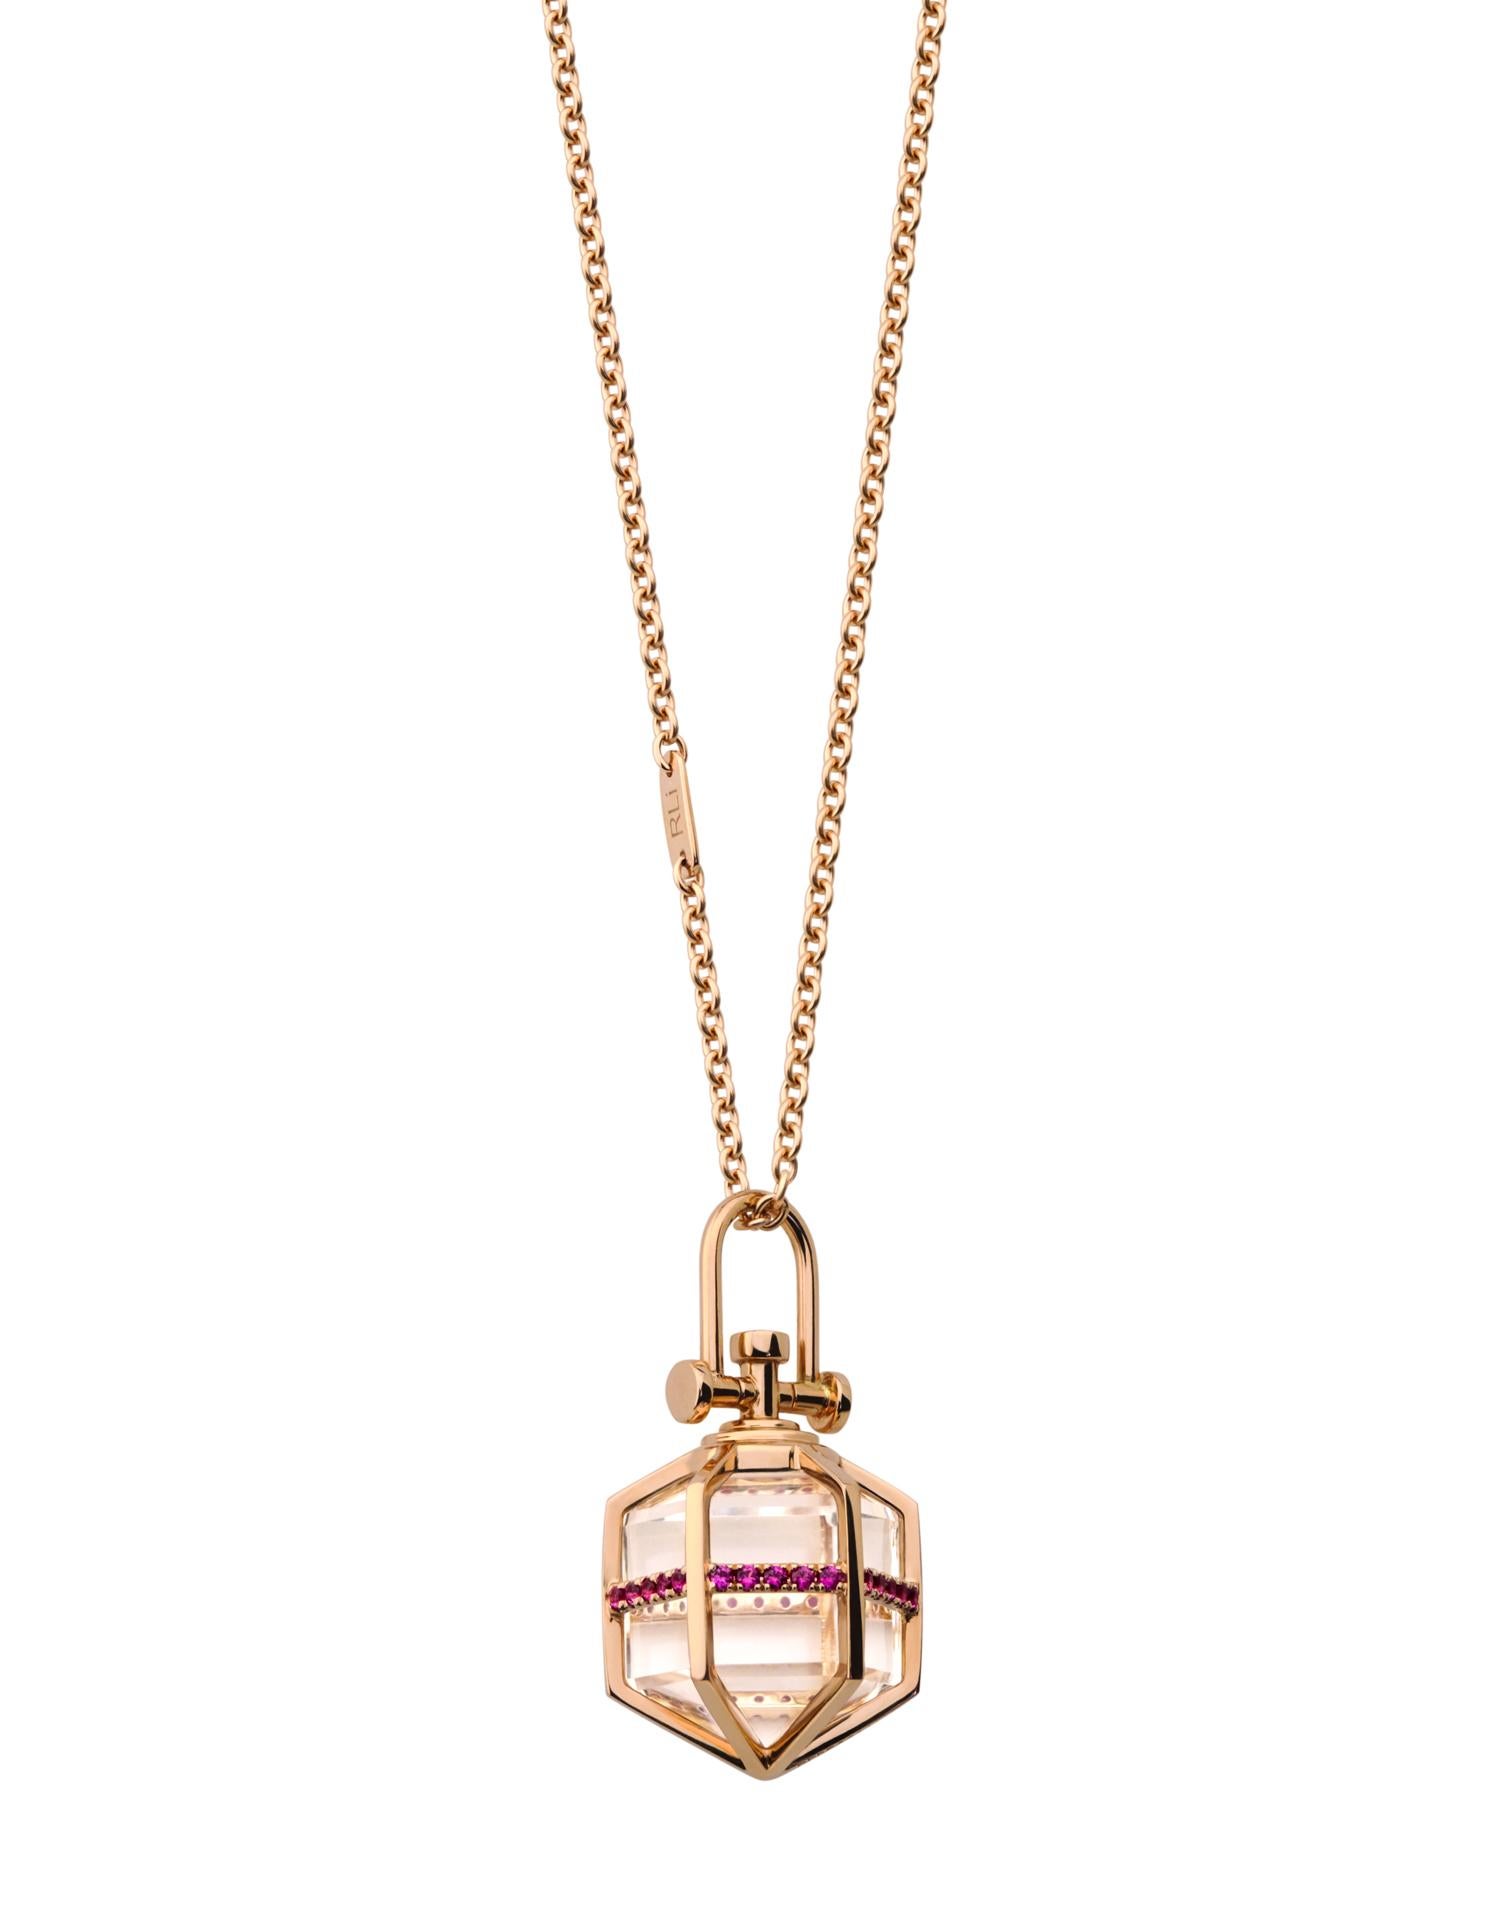 Rebecca Li designs mindfulness.
This elegant 18k rose gold necklace is a talisman for Success and Wealth. Wear it to always be in the right place at the right time. 

Talisman Pendant :
18k rose gold.
30 pieces small natural ruby.
Natural clear rock